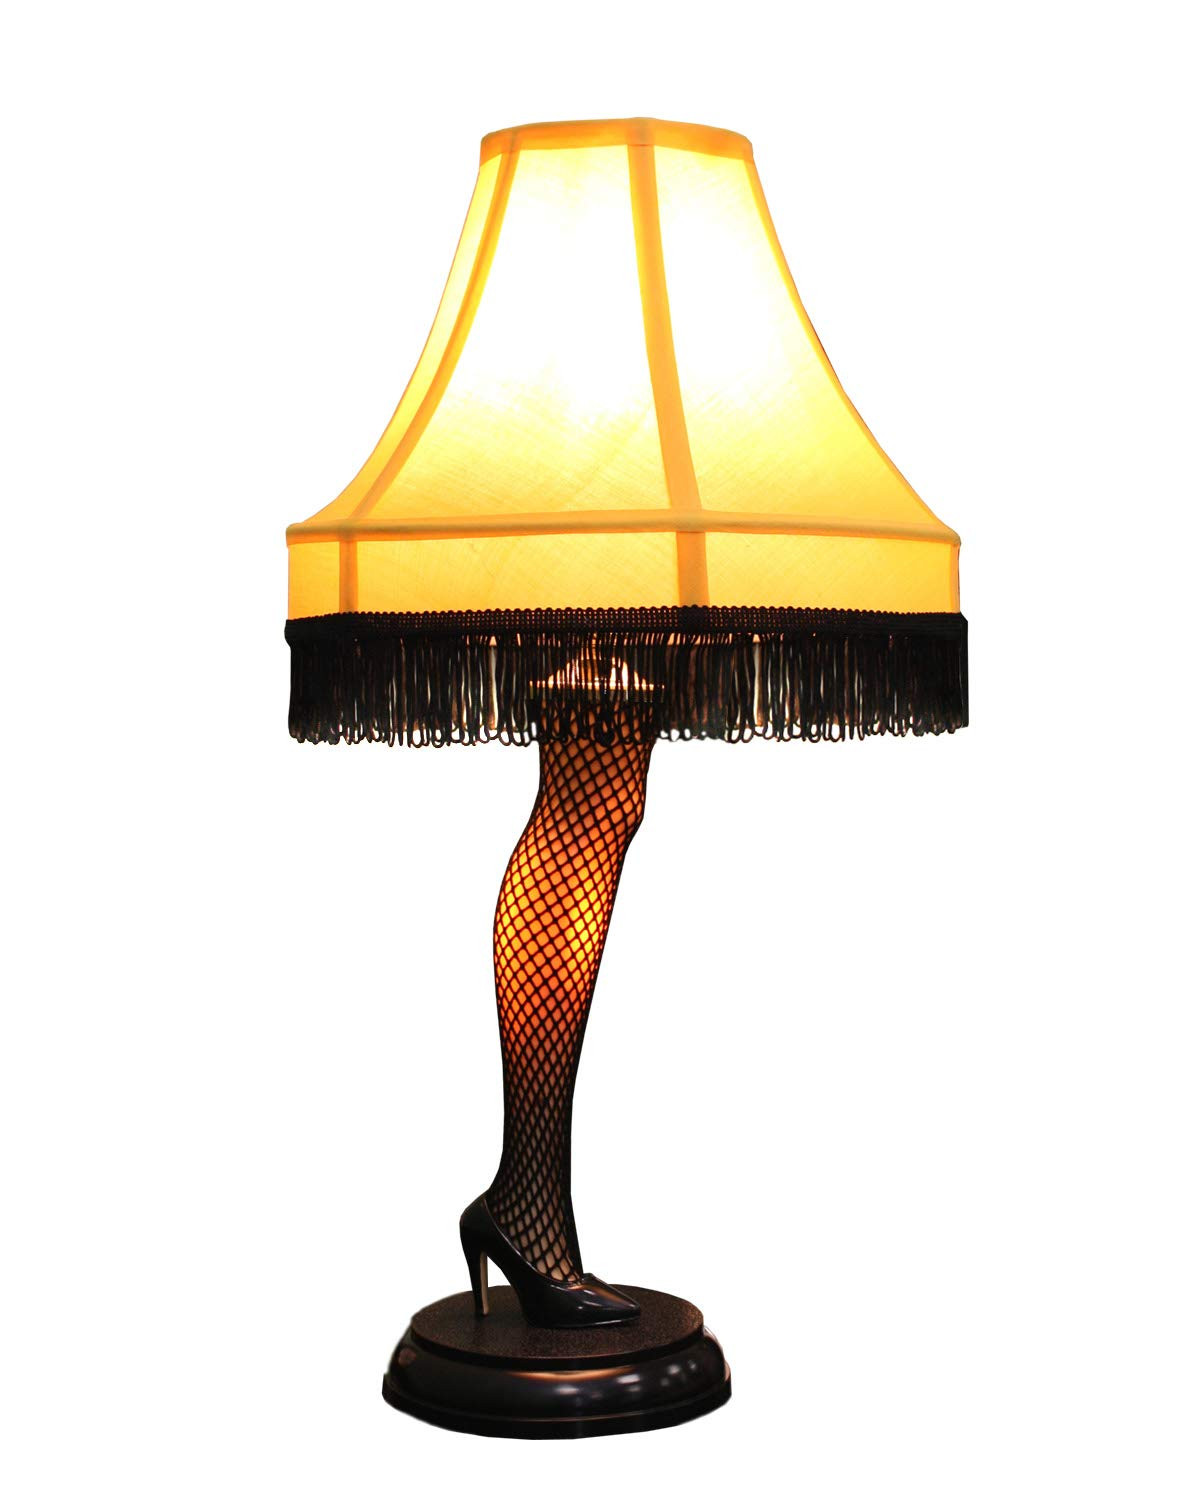 A Christmas Story Lamp
 A Christmas Story 20 inch Leg Lamp Prop Replica by NECA